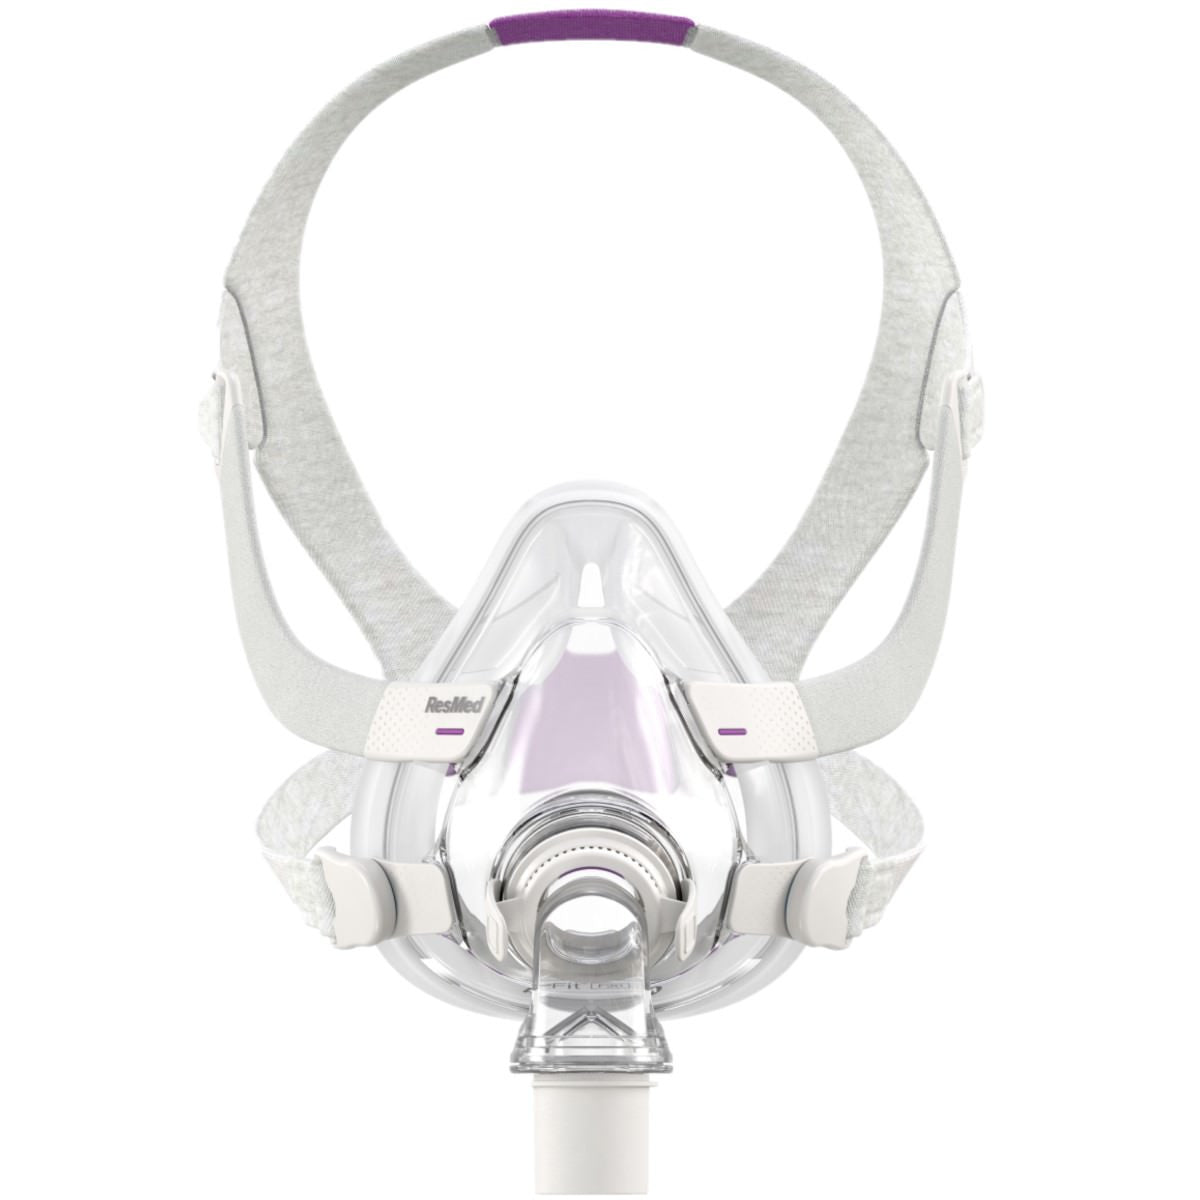 Resmed Airfit F20 For Her Full Face Mask System with Headgear